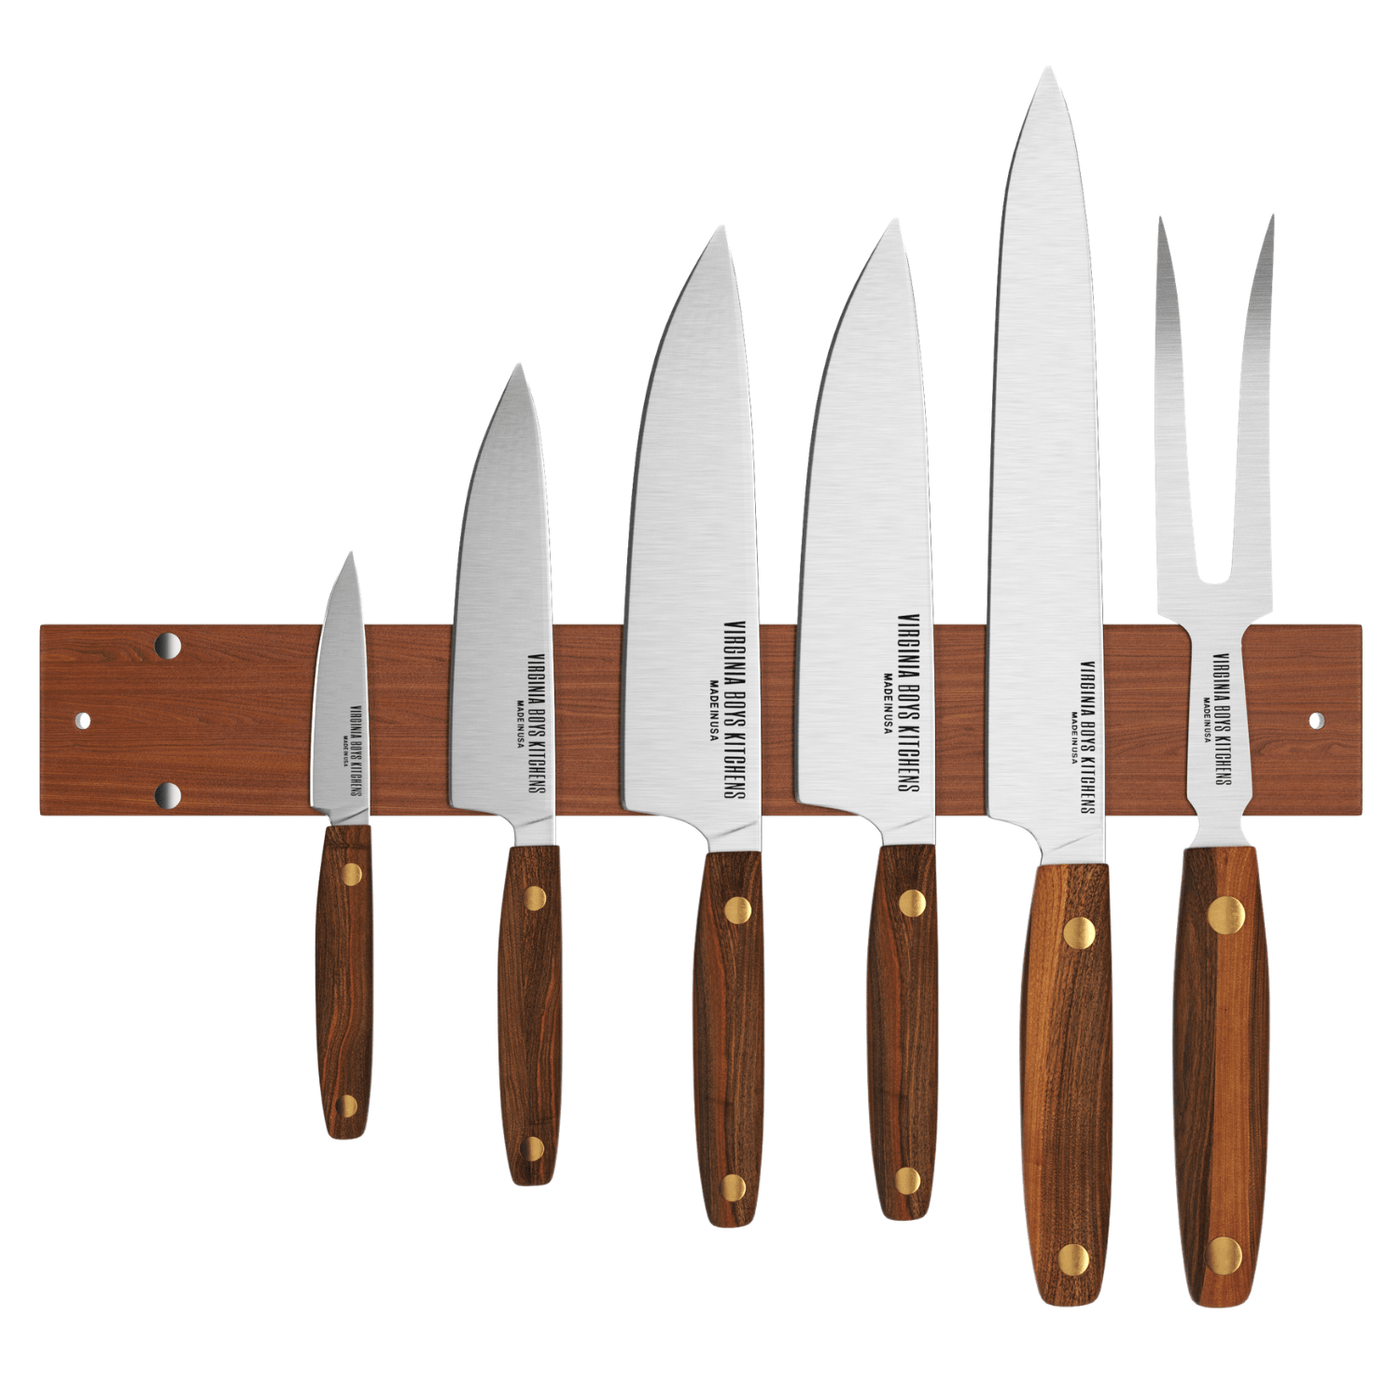 16" Wall Mounted Magnetic Walnut Wood Knife Rack - Holds 7 Knives by Virginia Boys Kitchens